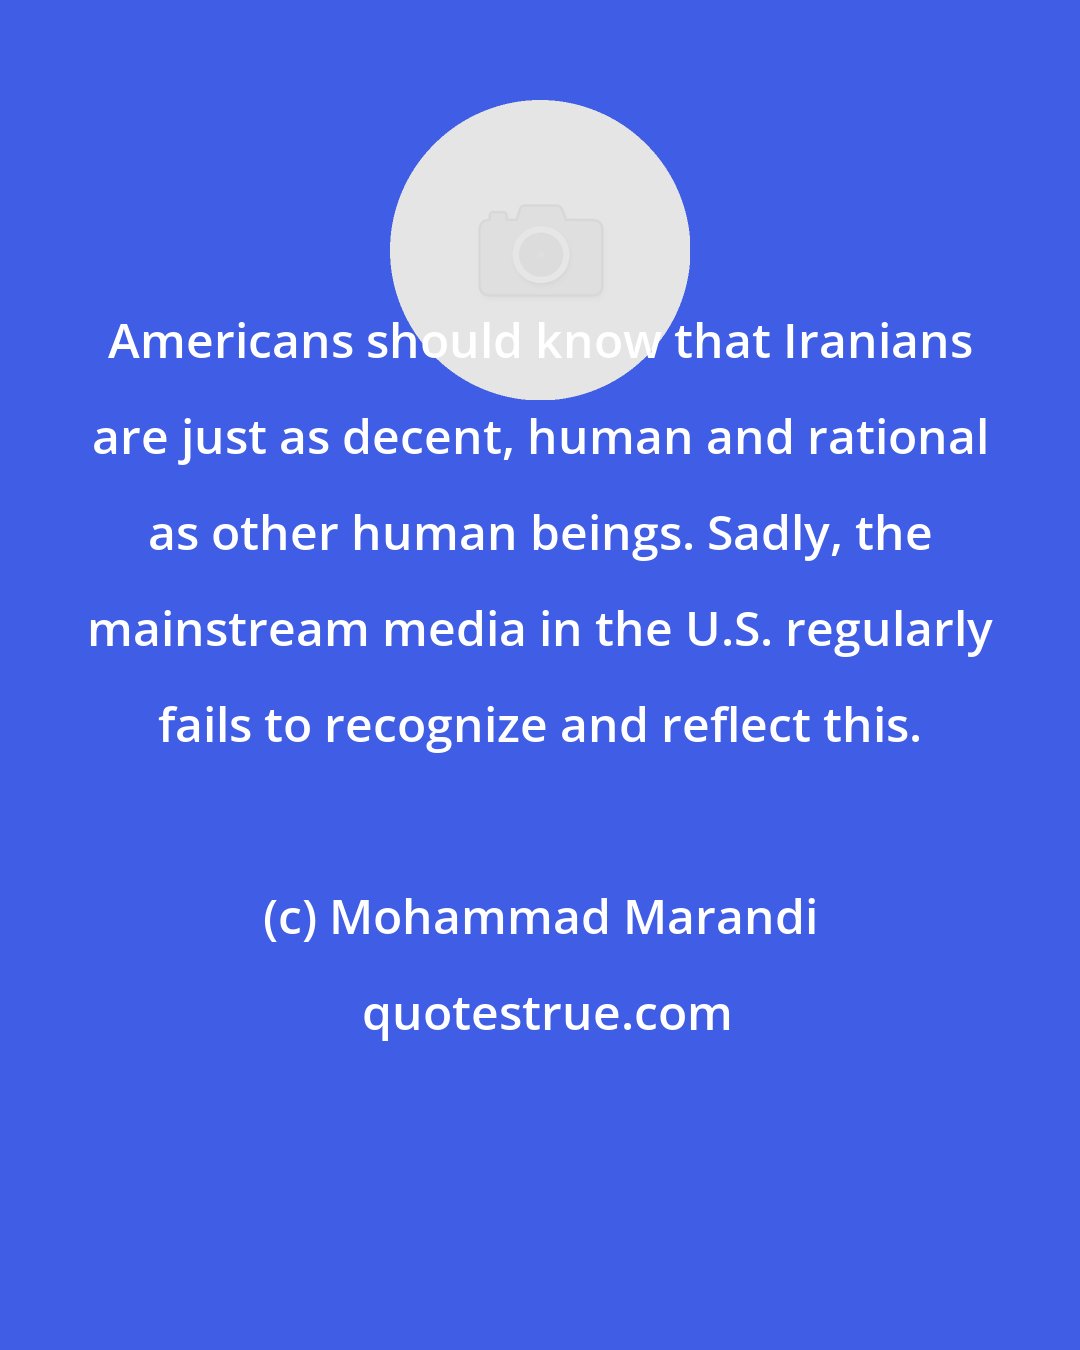 Mohammad Marandi: Americans should know that Iranians are just as decent, human and rational as other human beings. Sadly, the mainstream media in the U.S. regularly fails to recognize and reflect this.